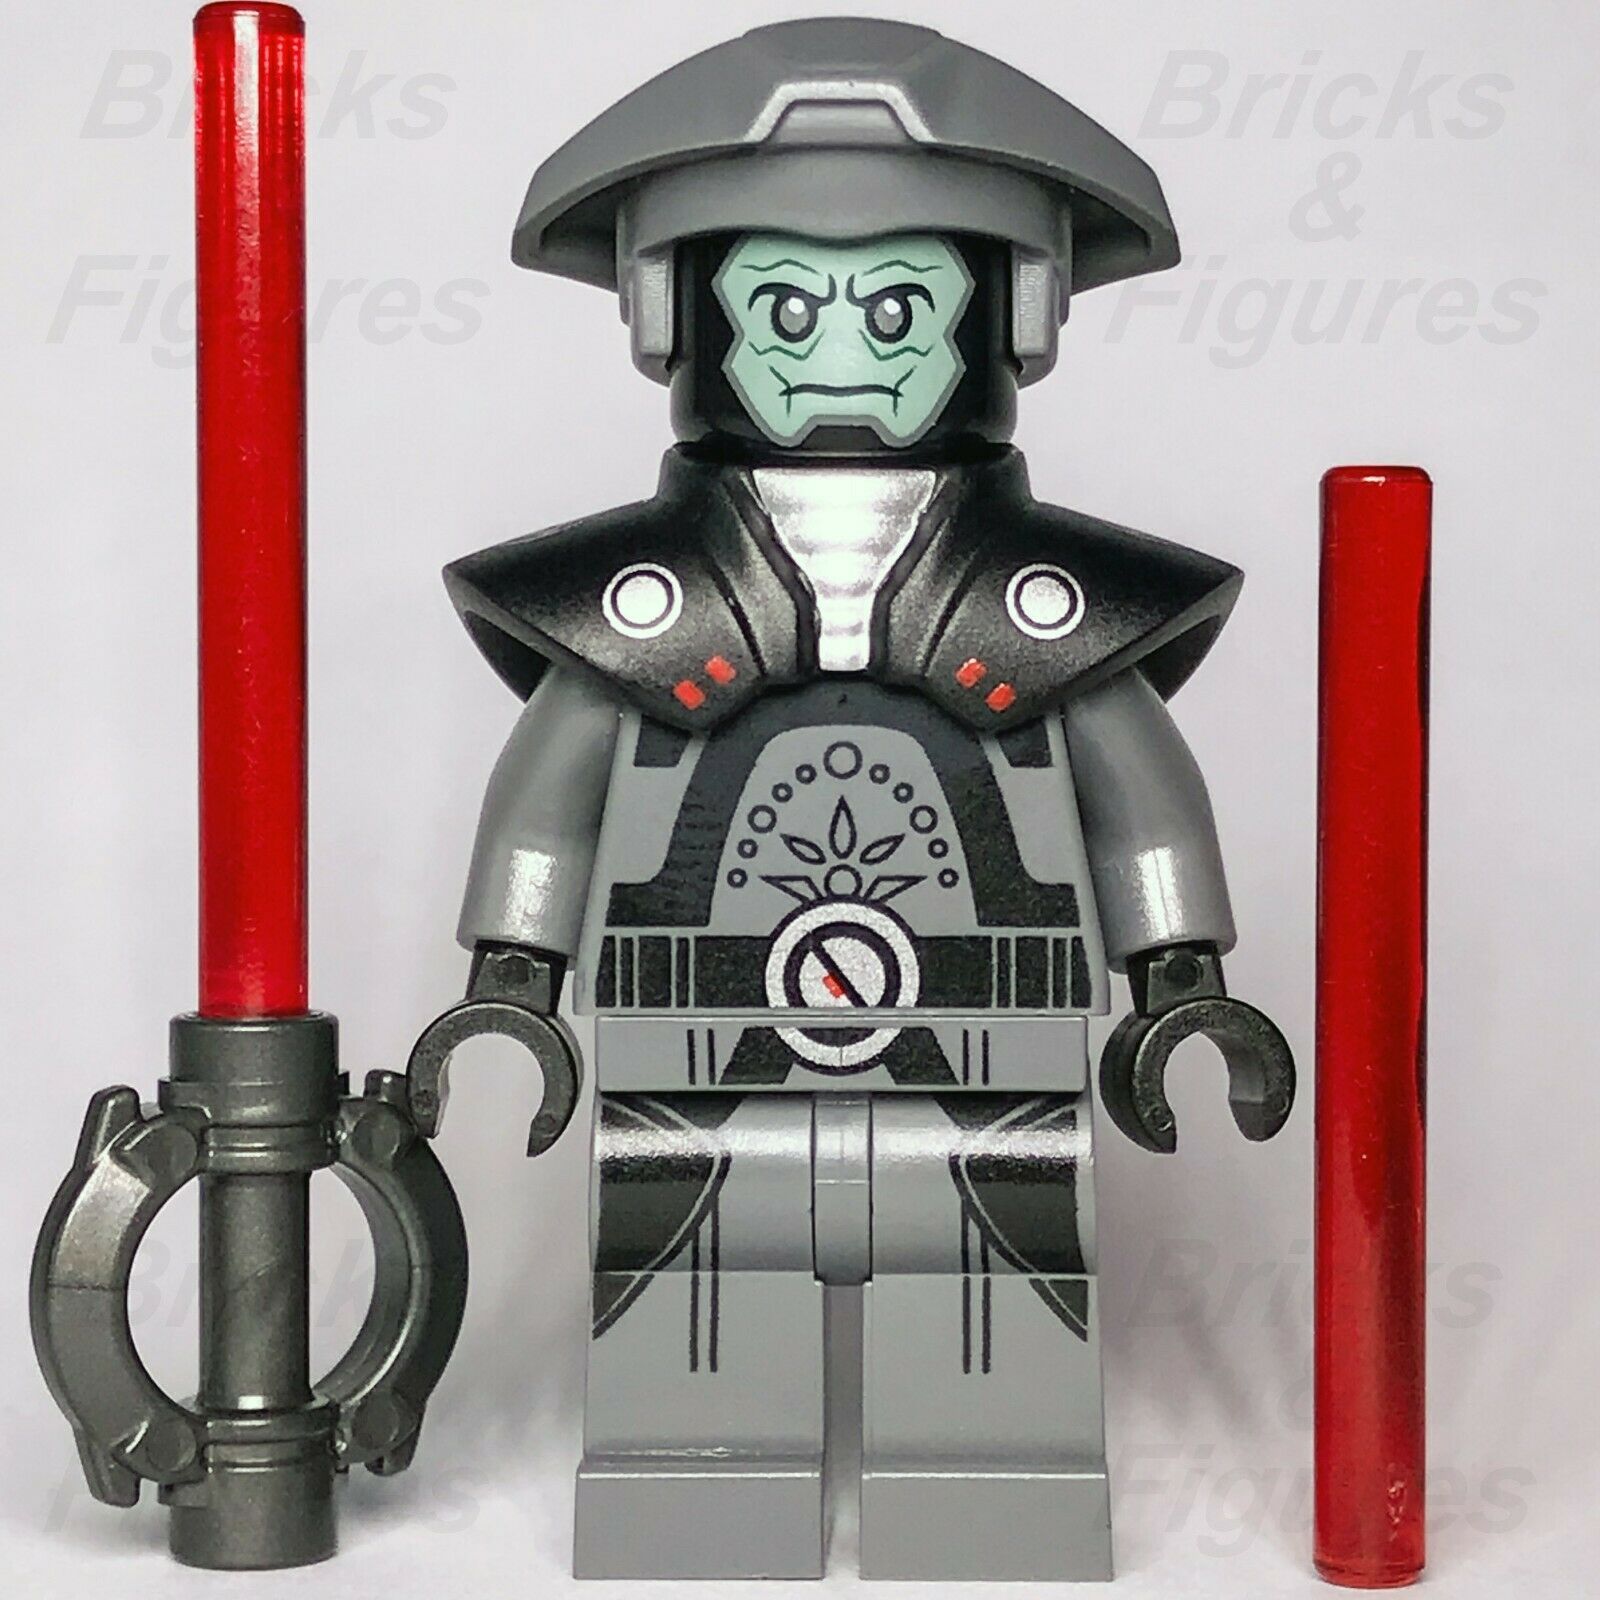 New Star Wars LEGO Imperial Inquisitor Fifth Brother Rebels Minifigure 75157 - Bricks & Figures